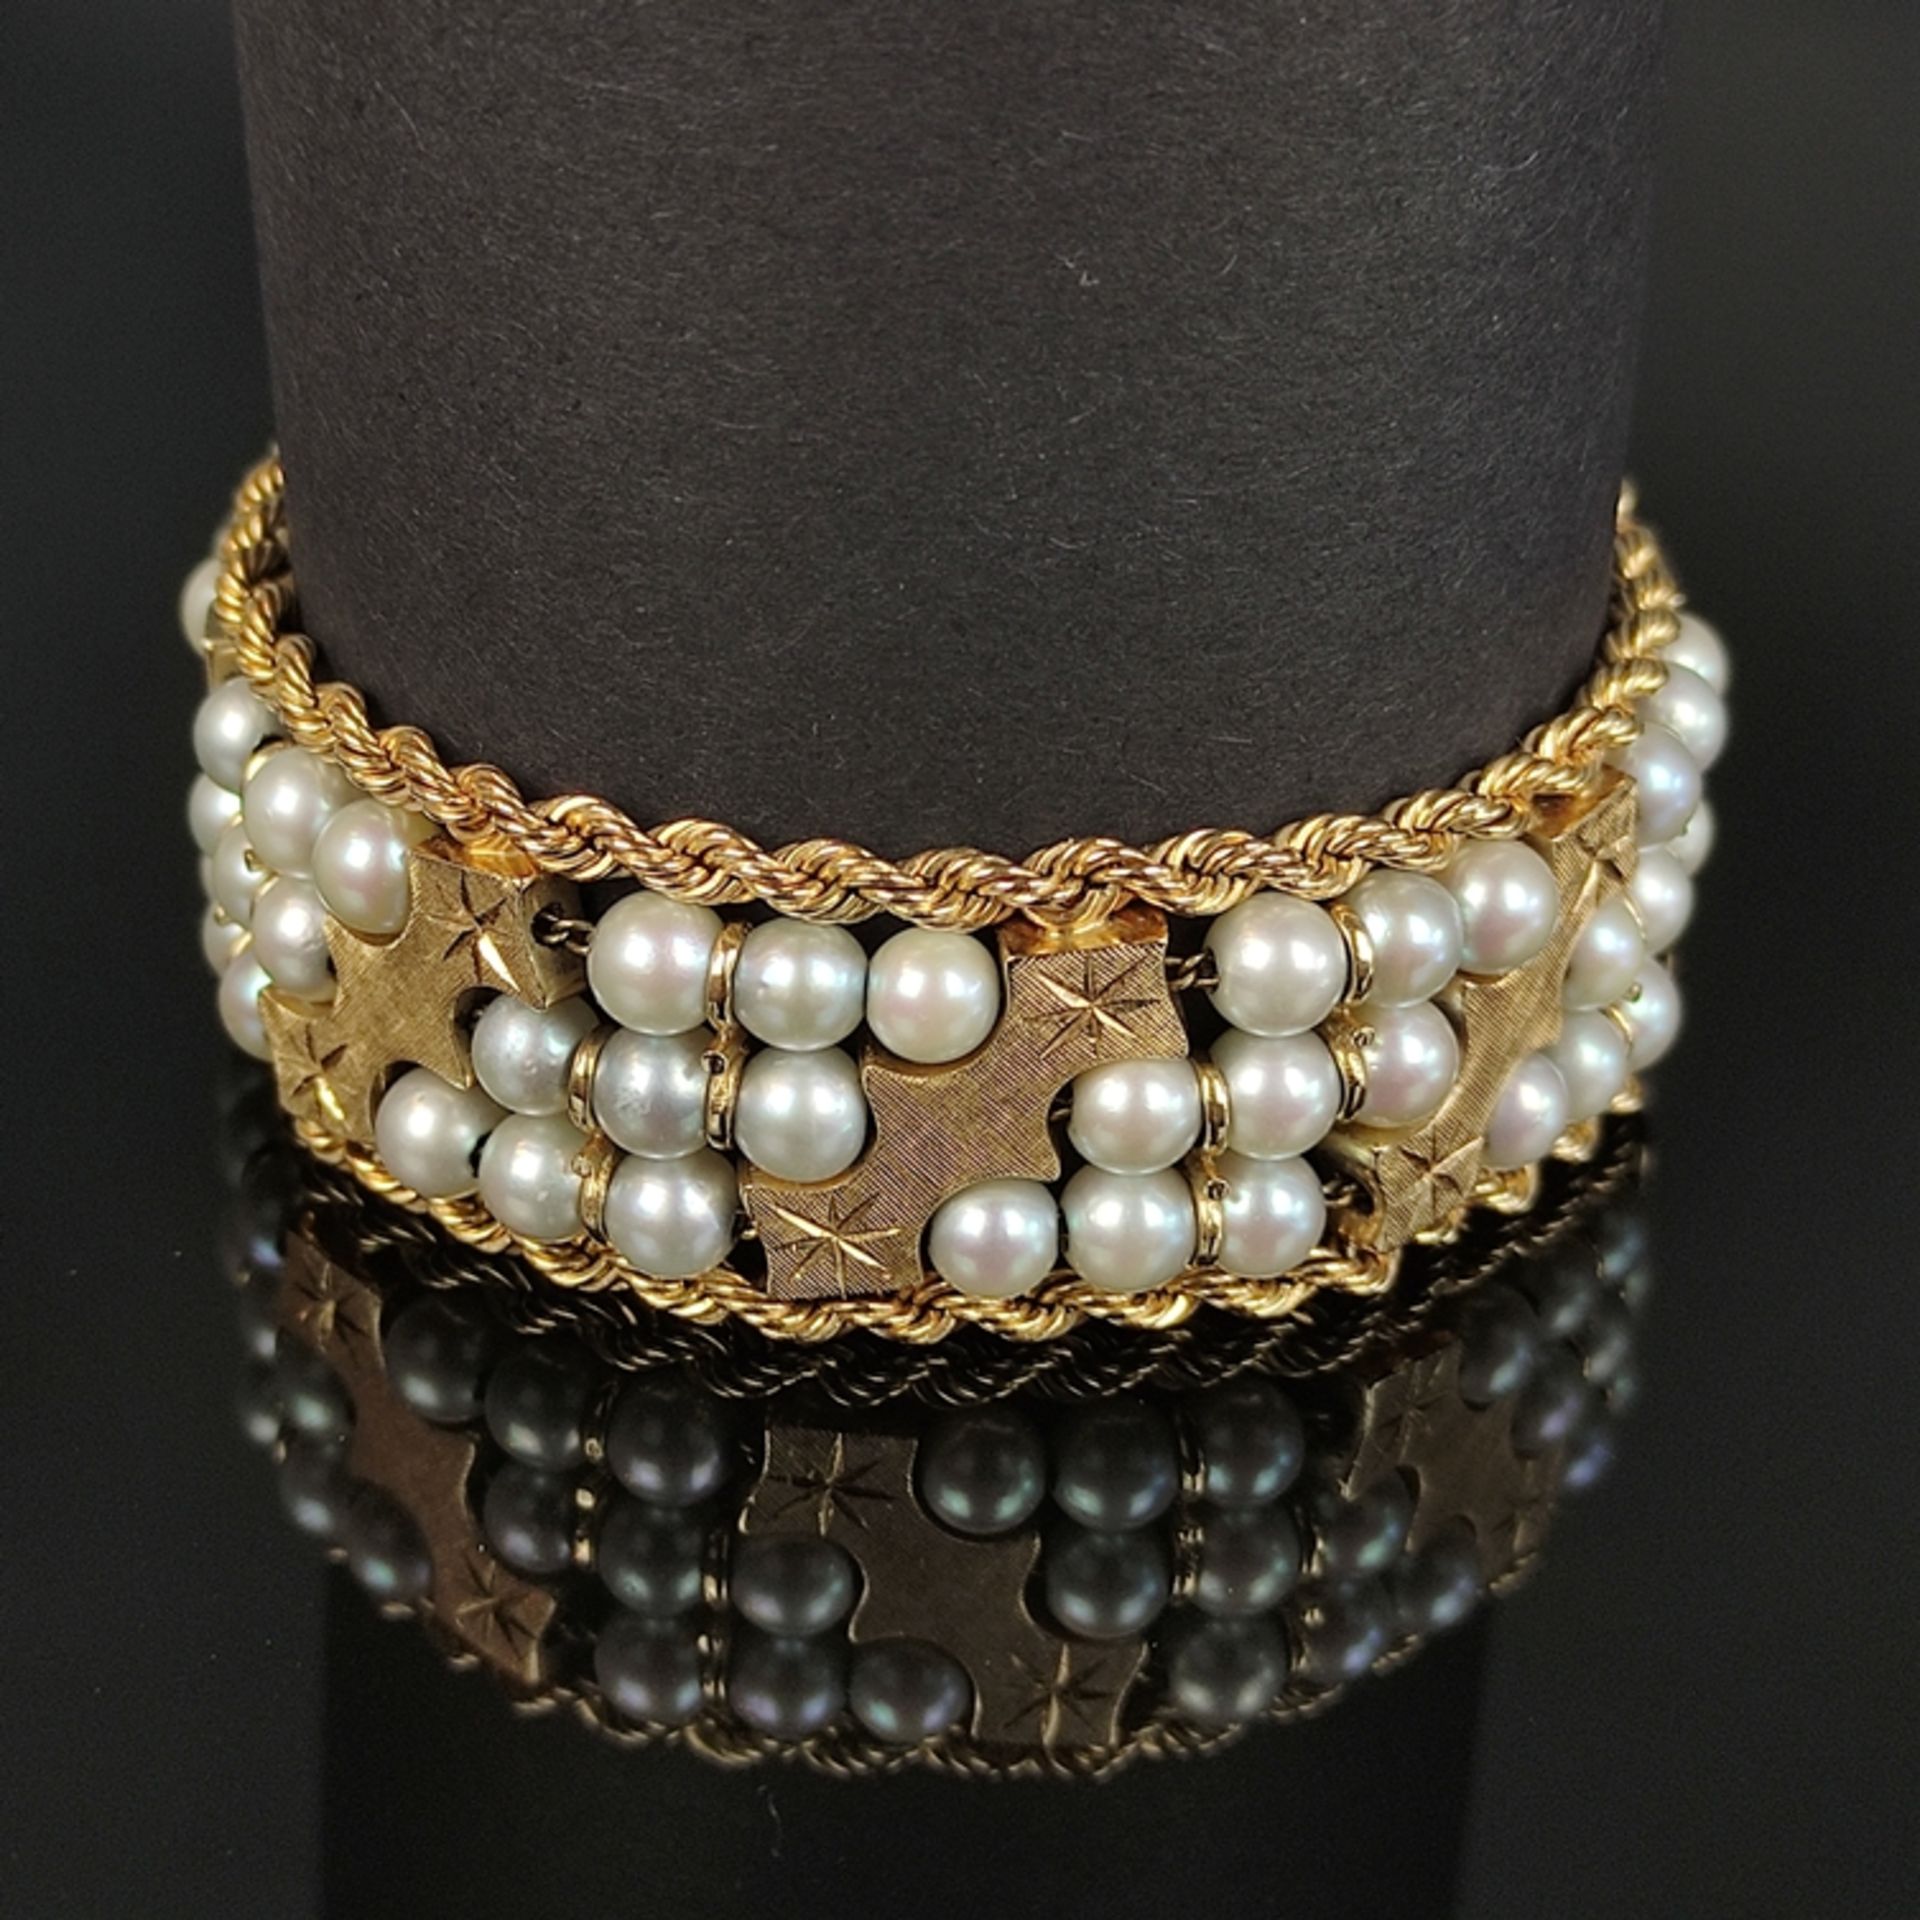 Pearl gold bracelet, 585/14K yellow gold, total weight 51.1g, set with 71 pearls, cord edges and de